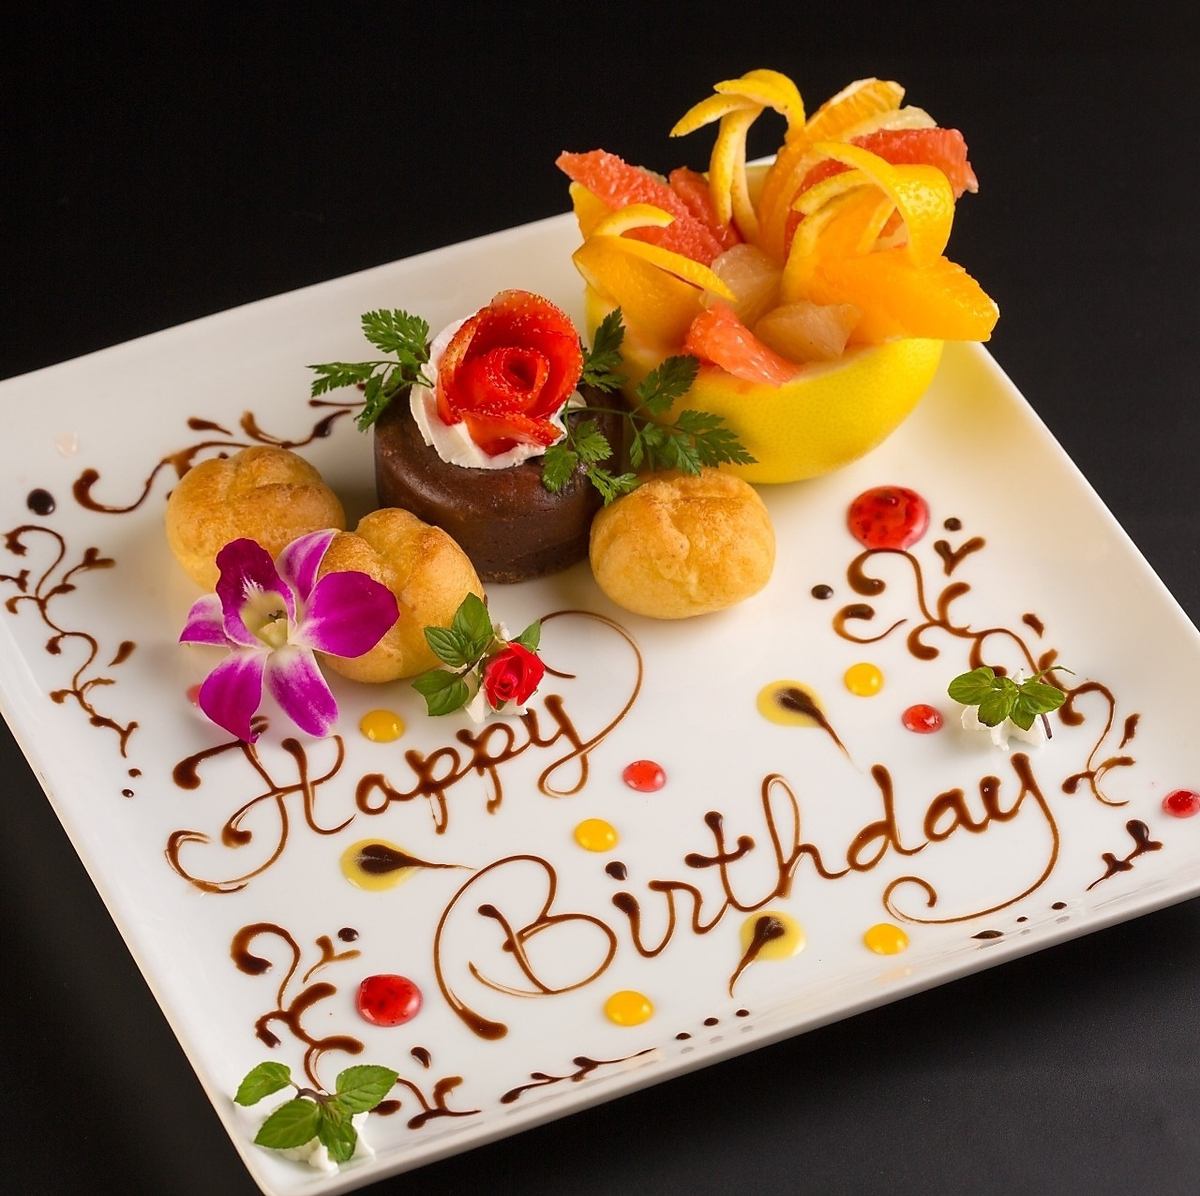 Surprise for birthdays, etc. We also have a plate with a message ♪